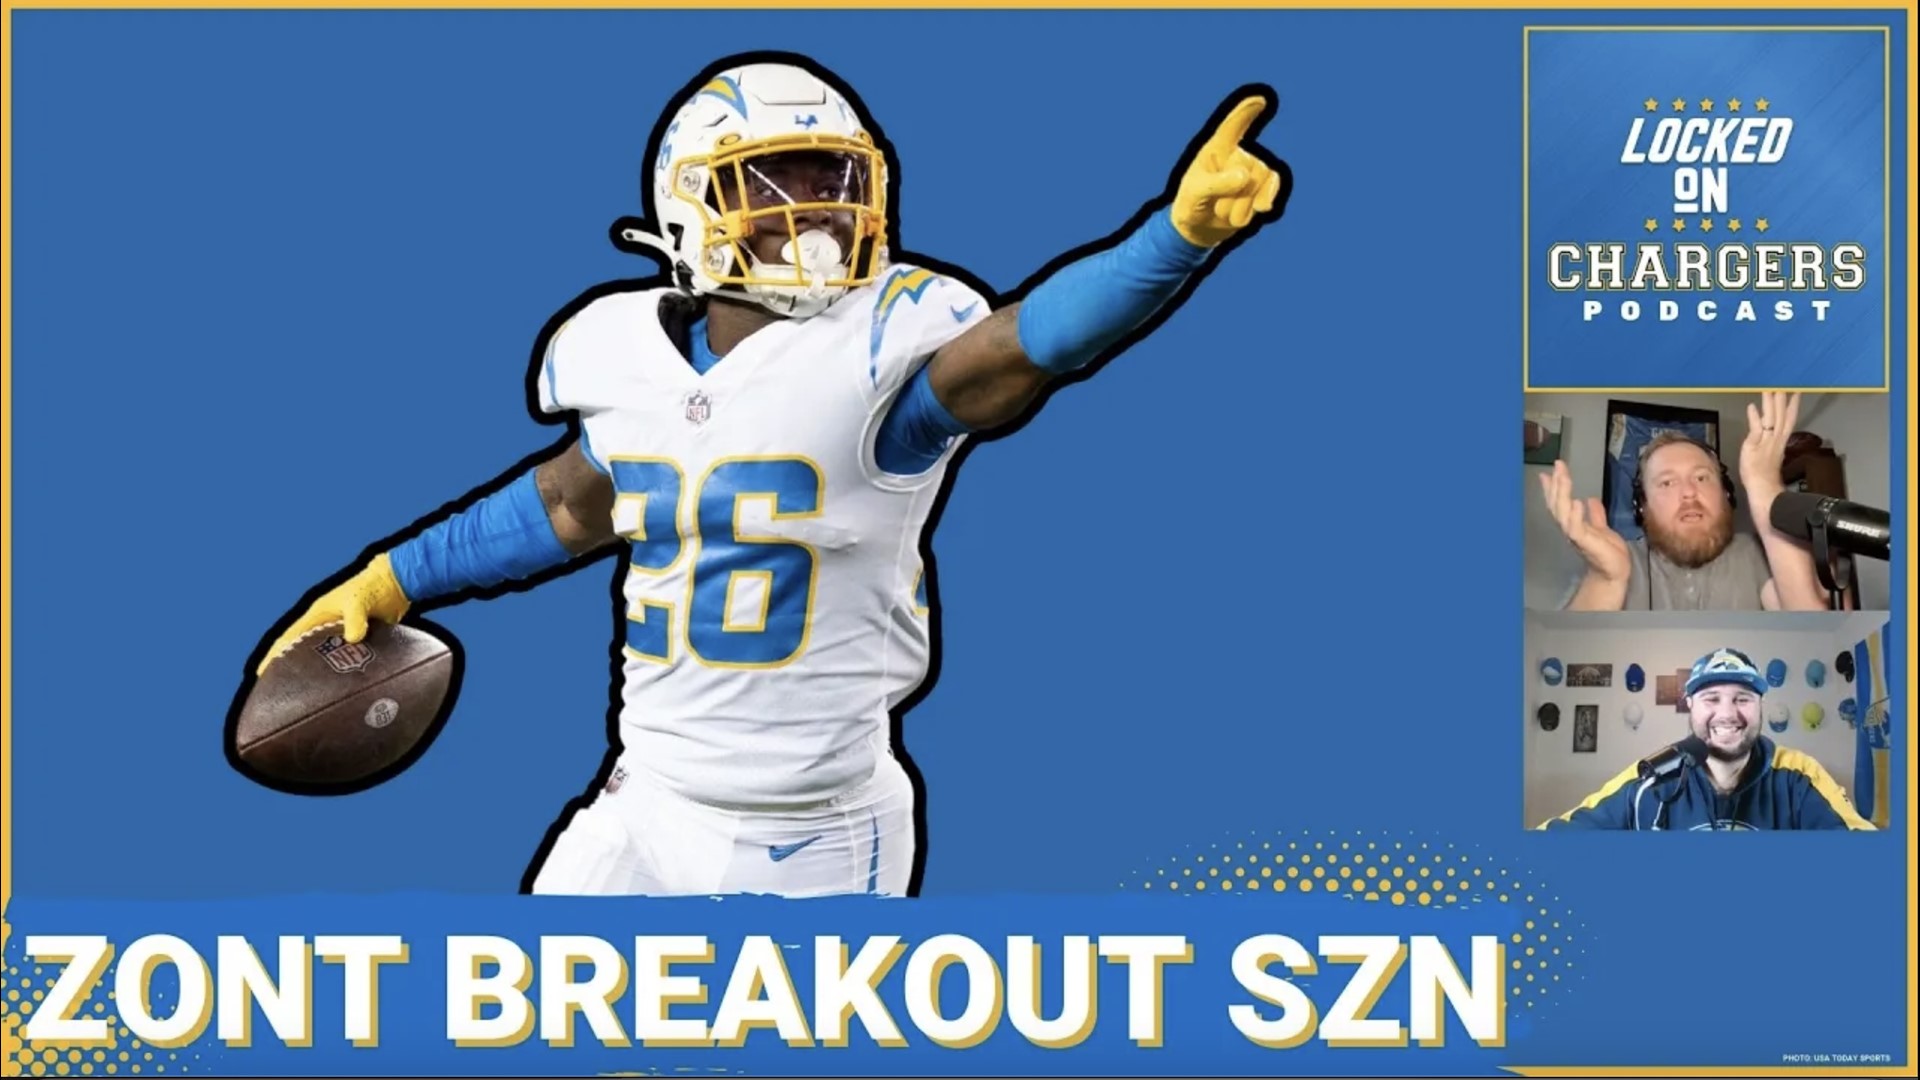 Asante Samuel Jr. is poised to breakout in 2023 for the Chargers after his electric 3 interception performance in the playoffs.